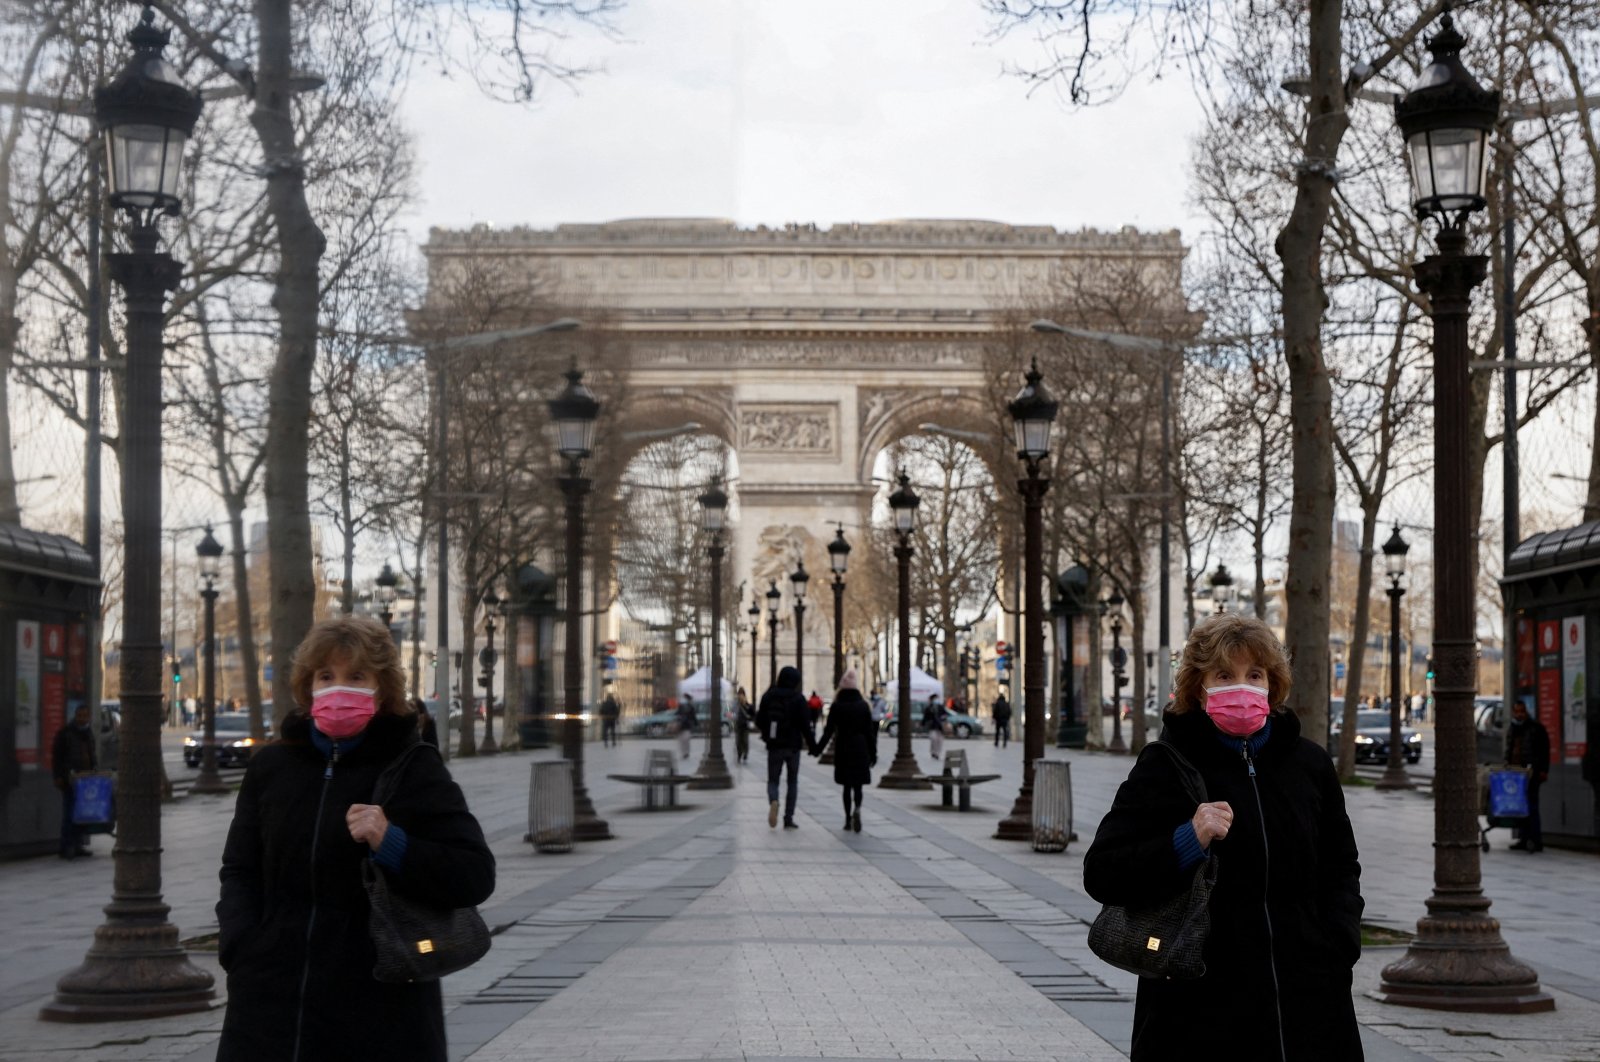 A woman wearing a protective face mask walks near the Arc de Triomphe on the Champs Elysees Avenue in Paris amid the coronavirus outbreak in France, Jan. 21, 2022. (Reuters Photo)